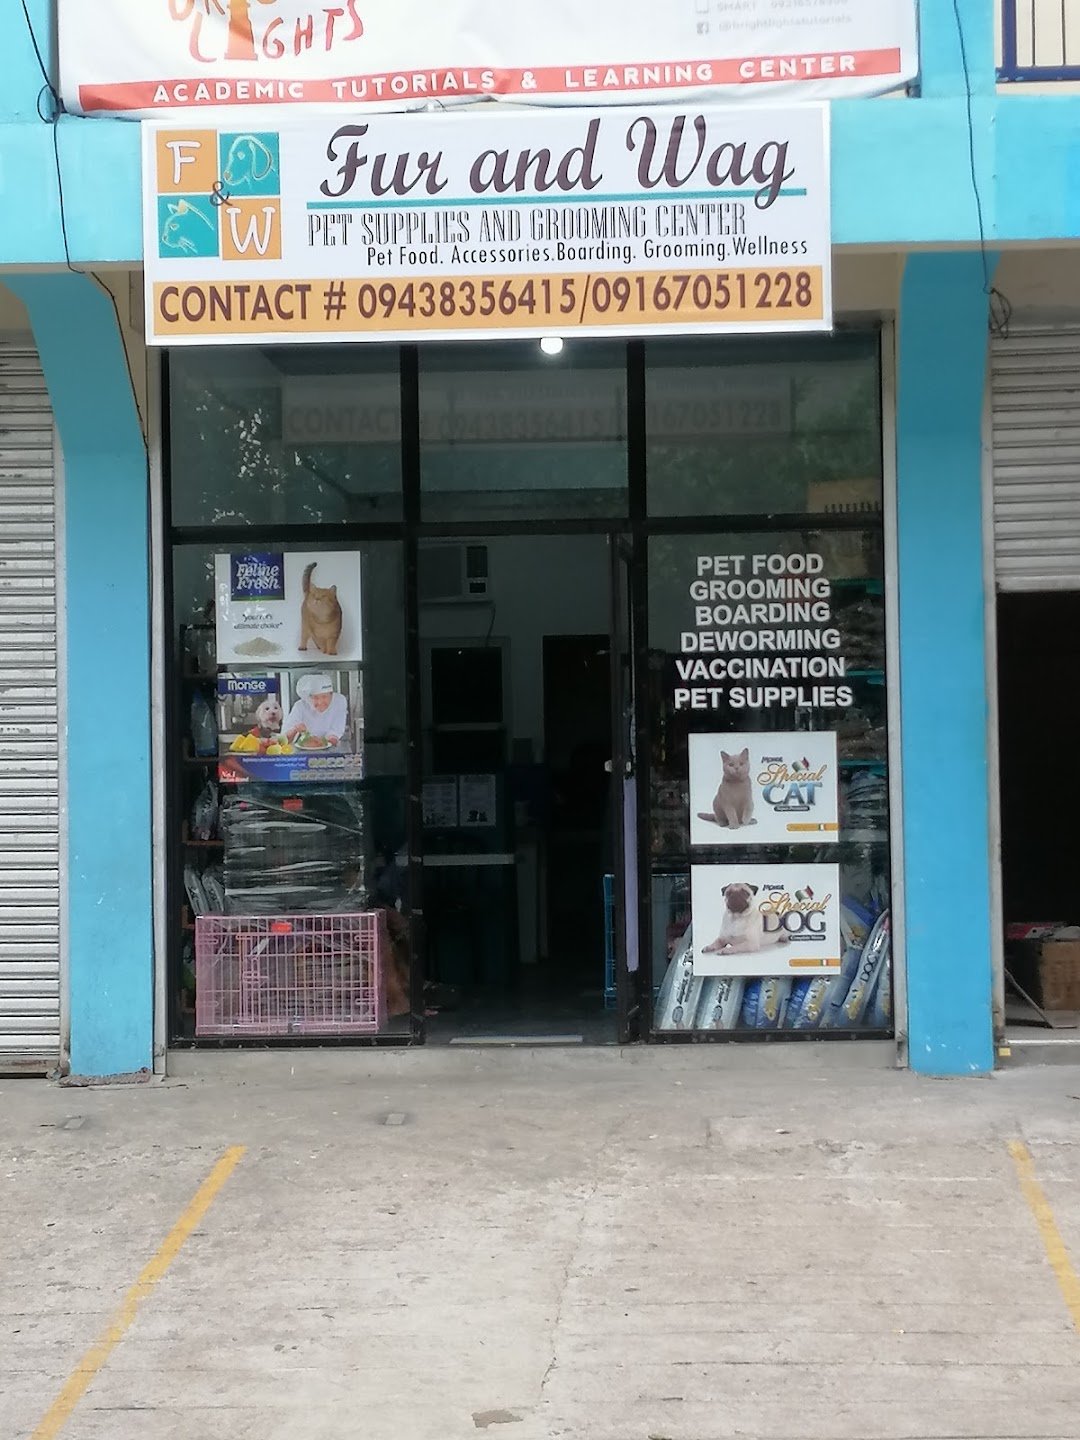 Fur and Wag Pet Supplies and Grooming Center